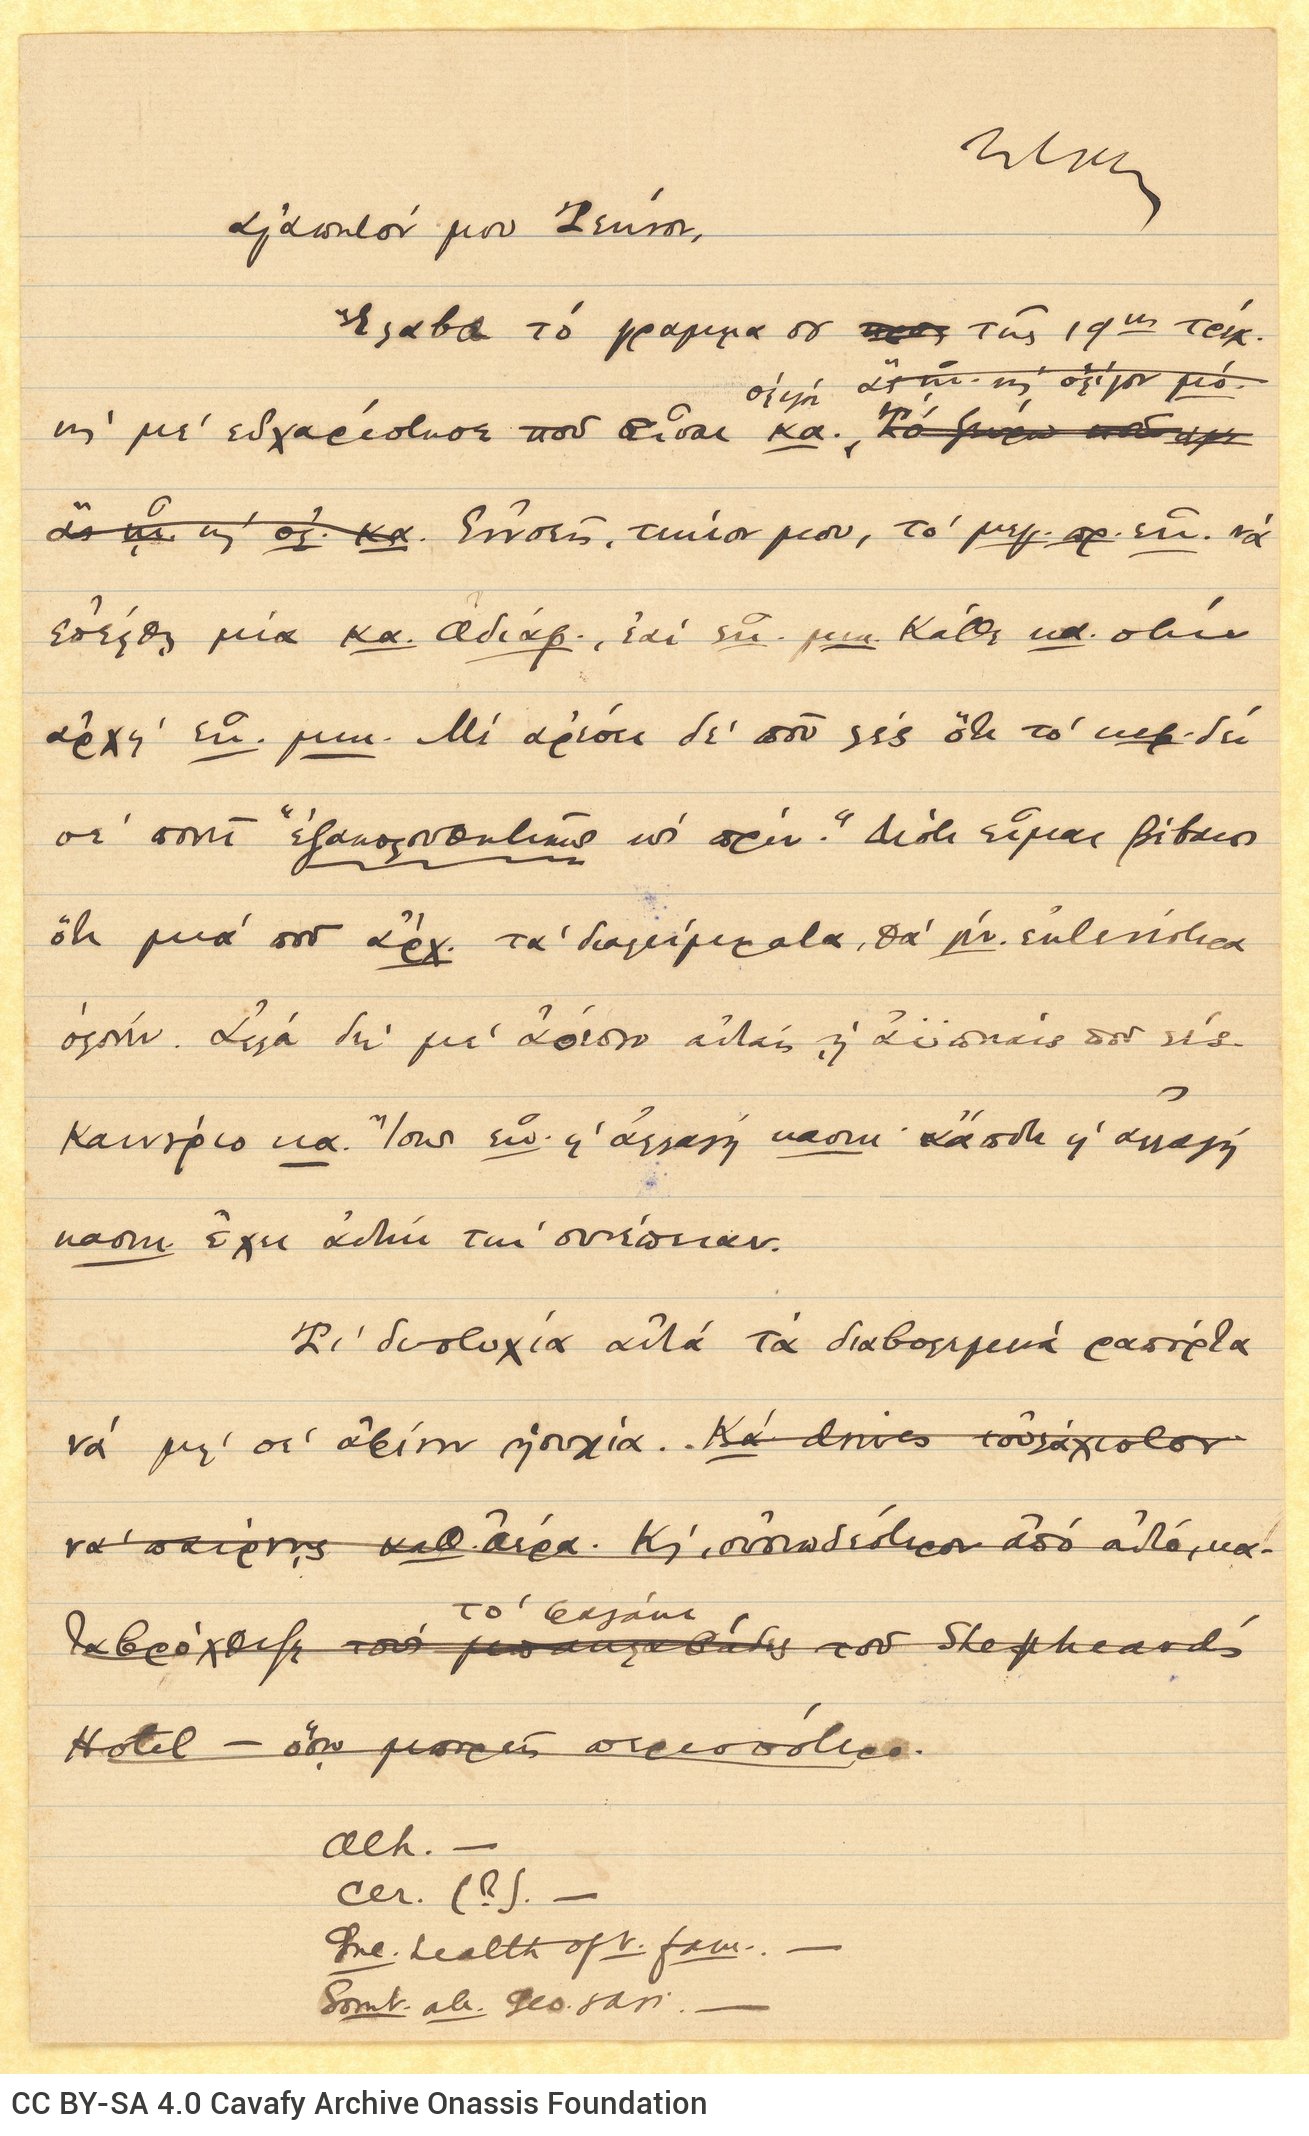 Handwritten draft letter by Cavafy on the first and last pages of double sheet notepaper. The remaining pages are blank. The 